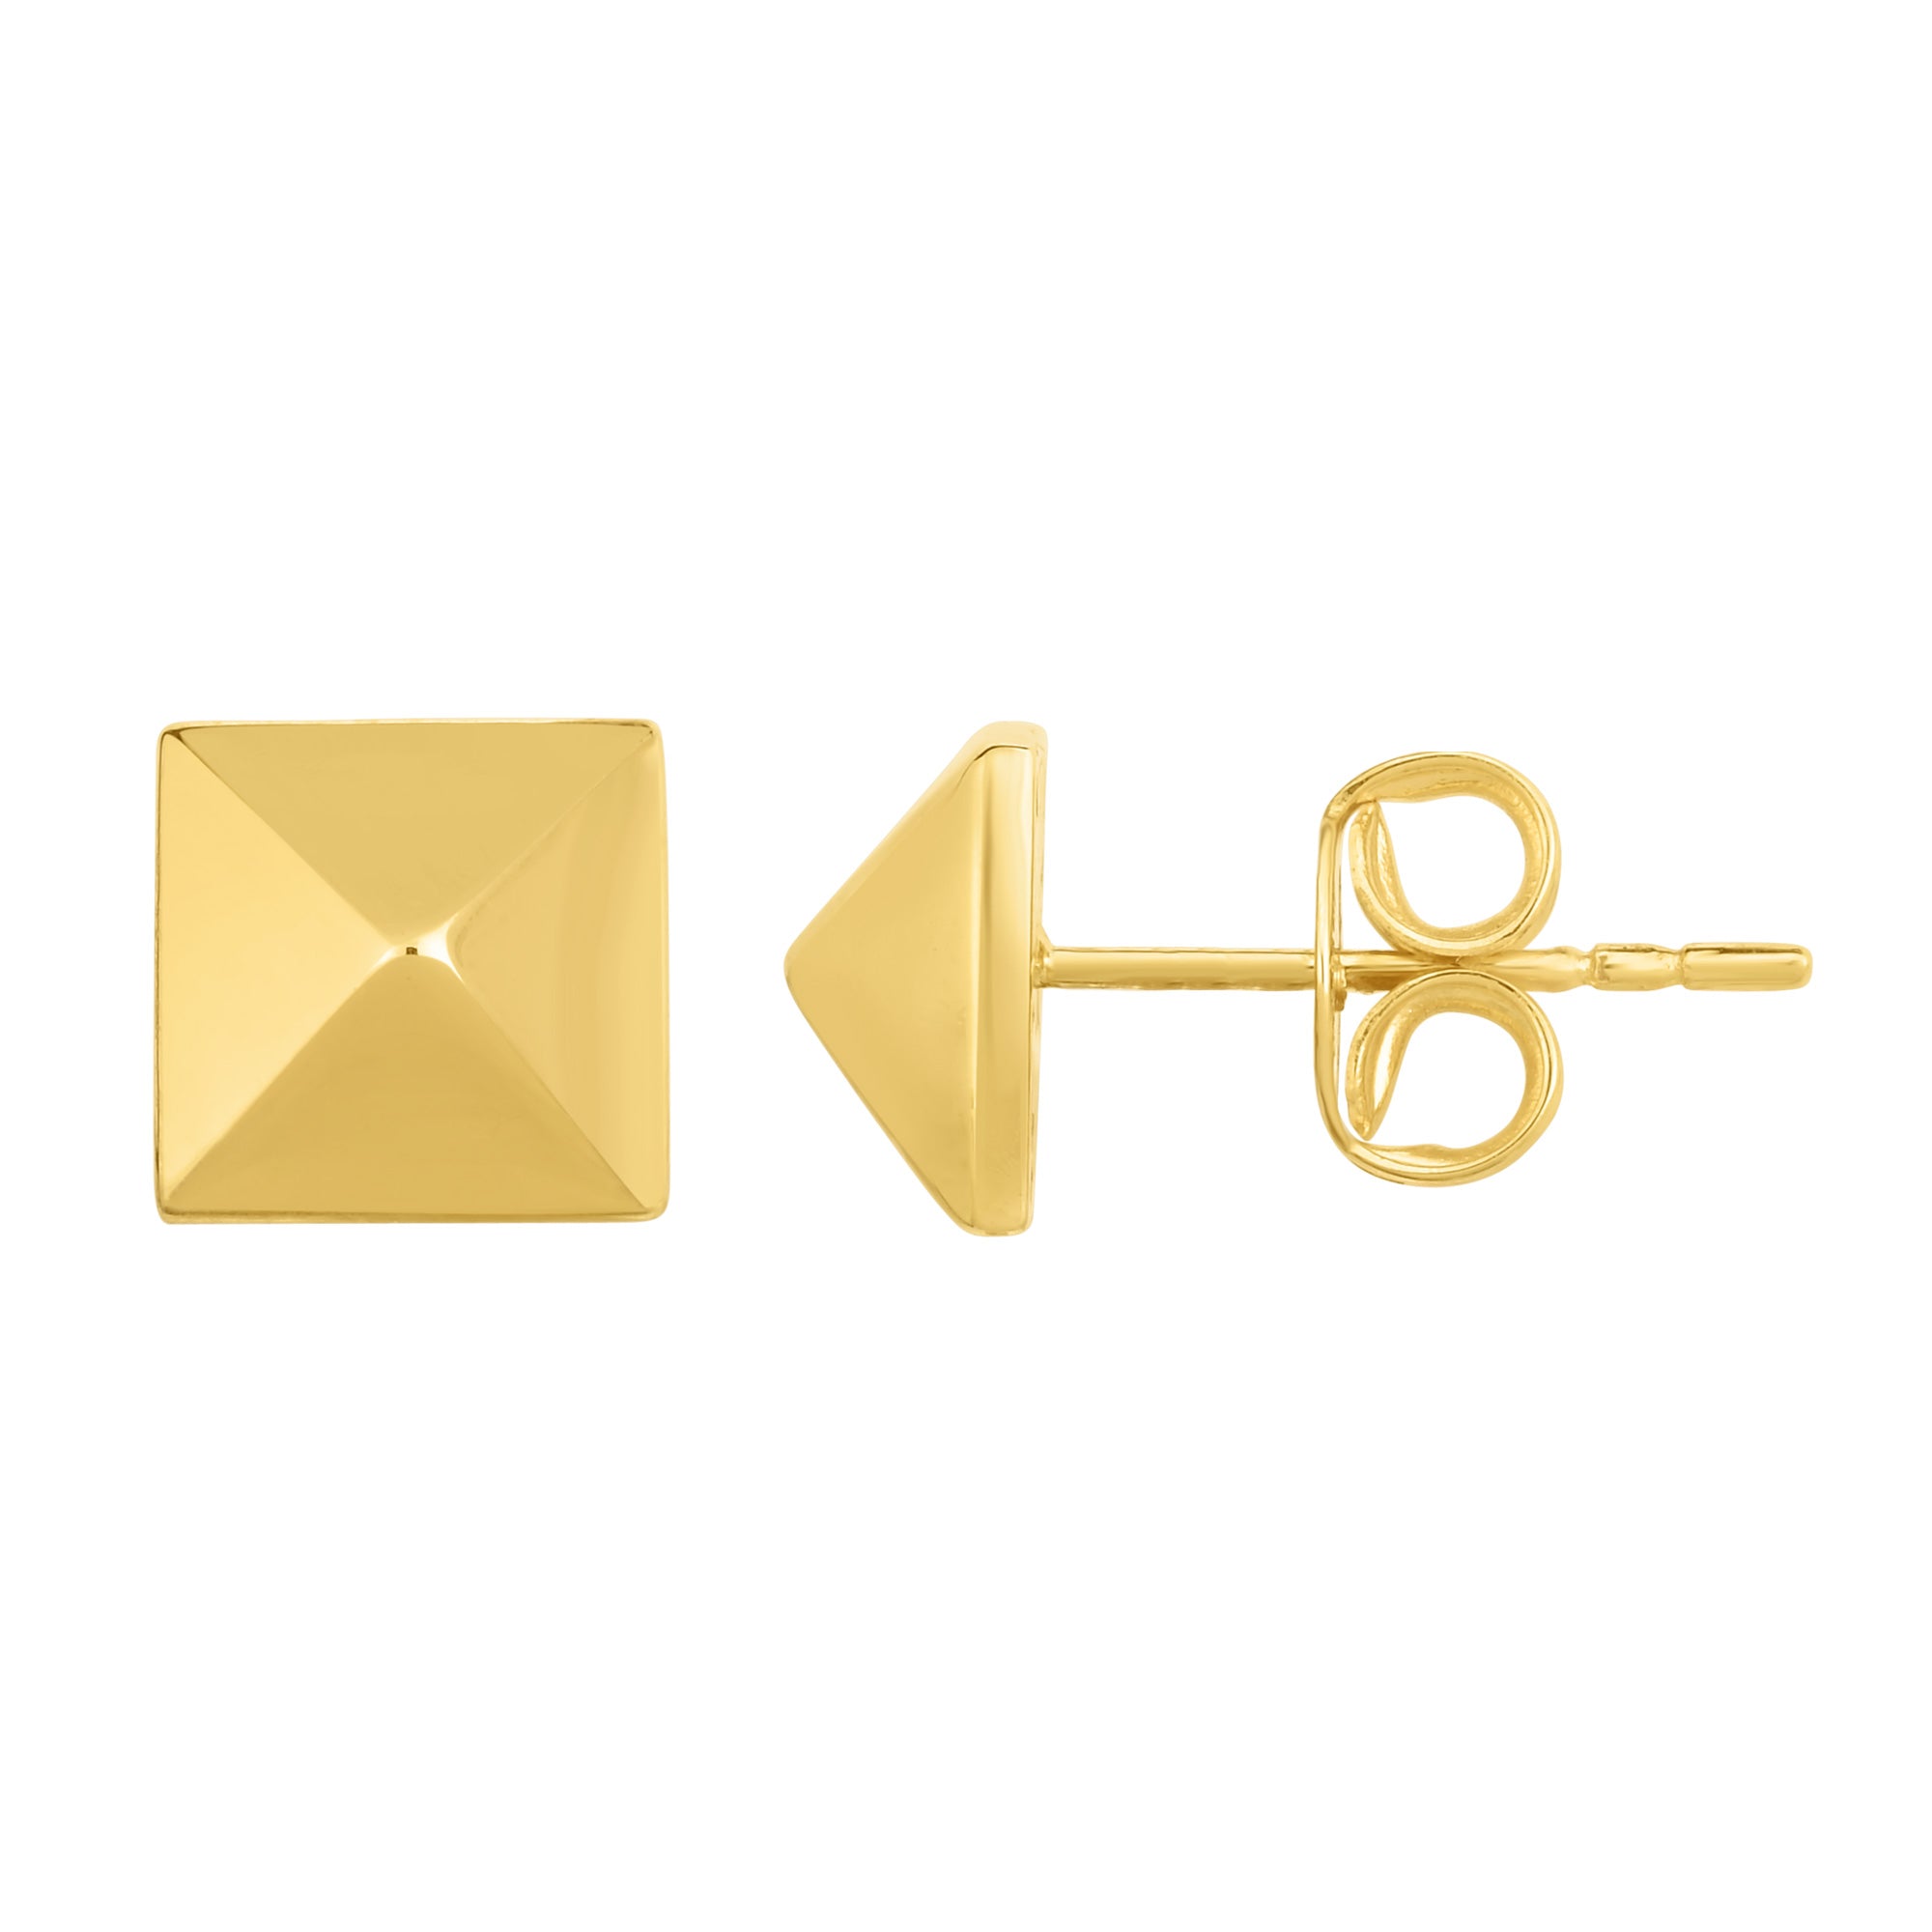 14K Gold Yellow Pyramid Style Stud Earrings fine designer jewelry for men and women